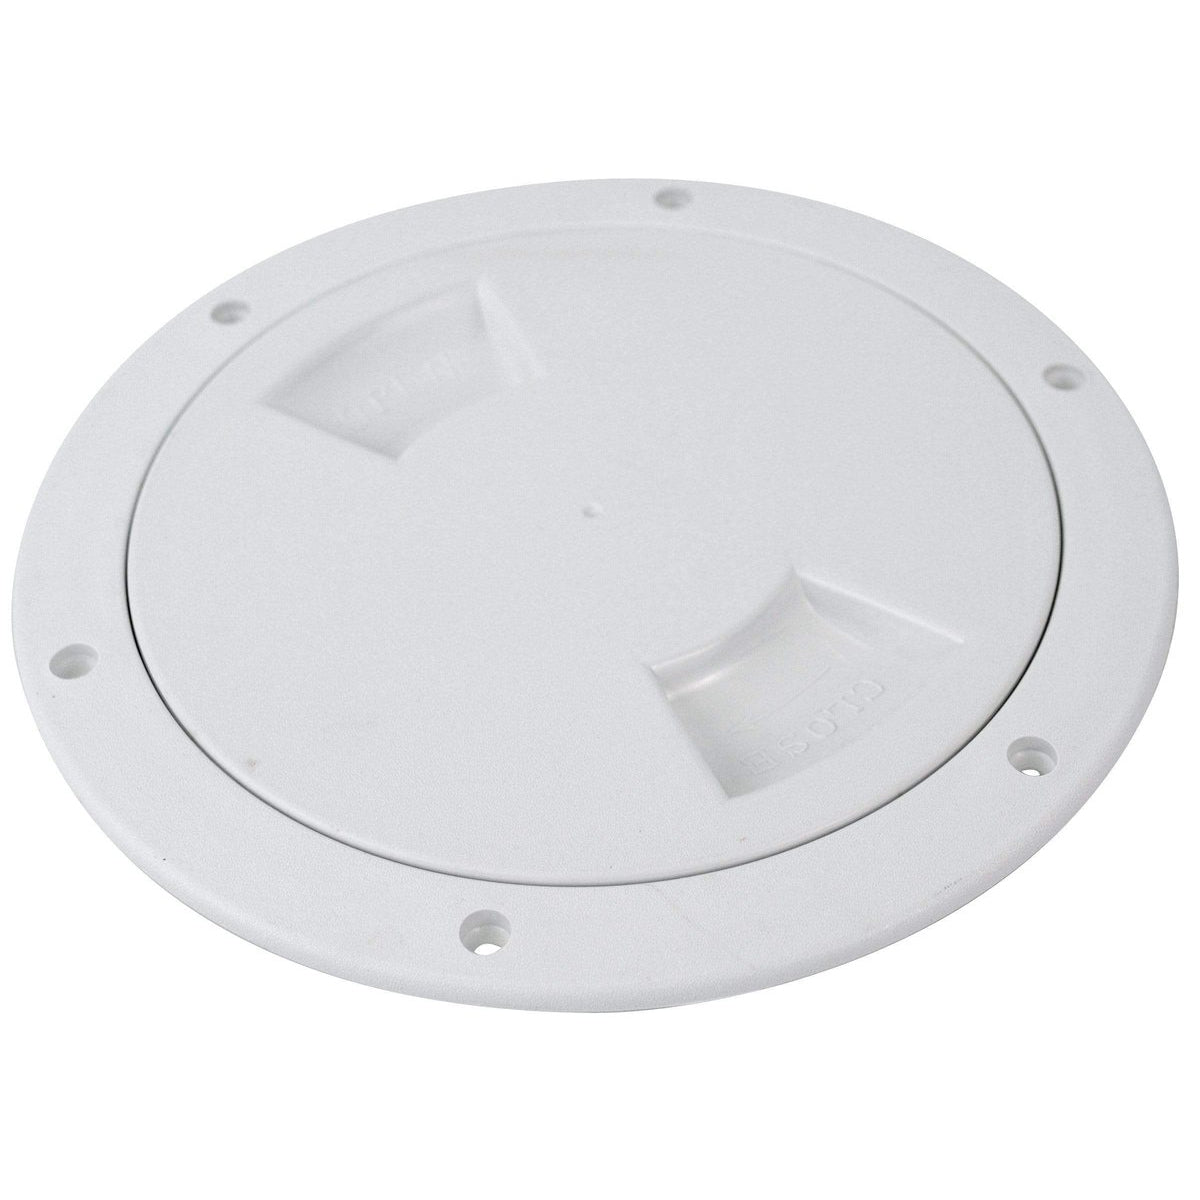 Attwood 6" Inspection Deck Plate-White #12792-1